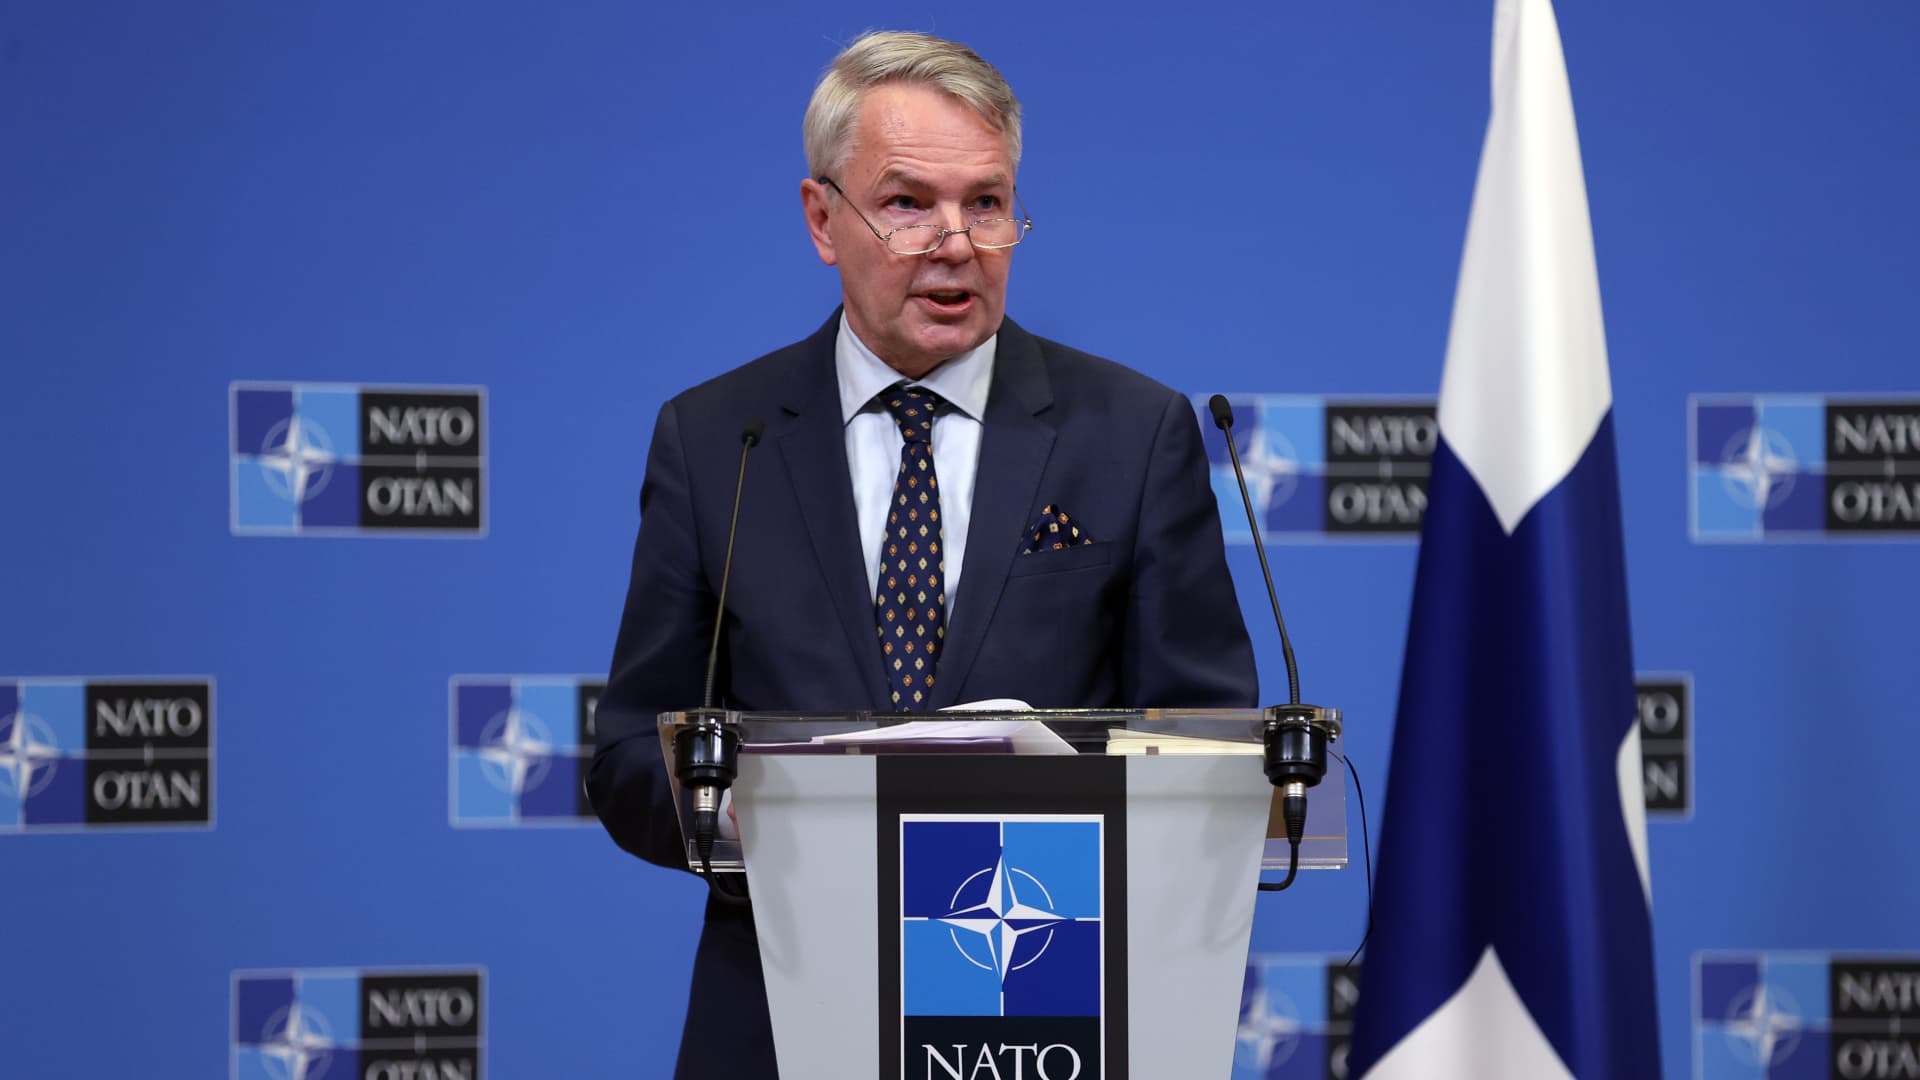 NATO Secretary General Jens Stoltenberg, Swedish Foreign Minister Ann Linde and Finnish Foreign Minister Pekka Haavisto hold a joint press conference after their meeting at NATO headquarters in Brussels, Belgium on January 24, 2022.